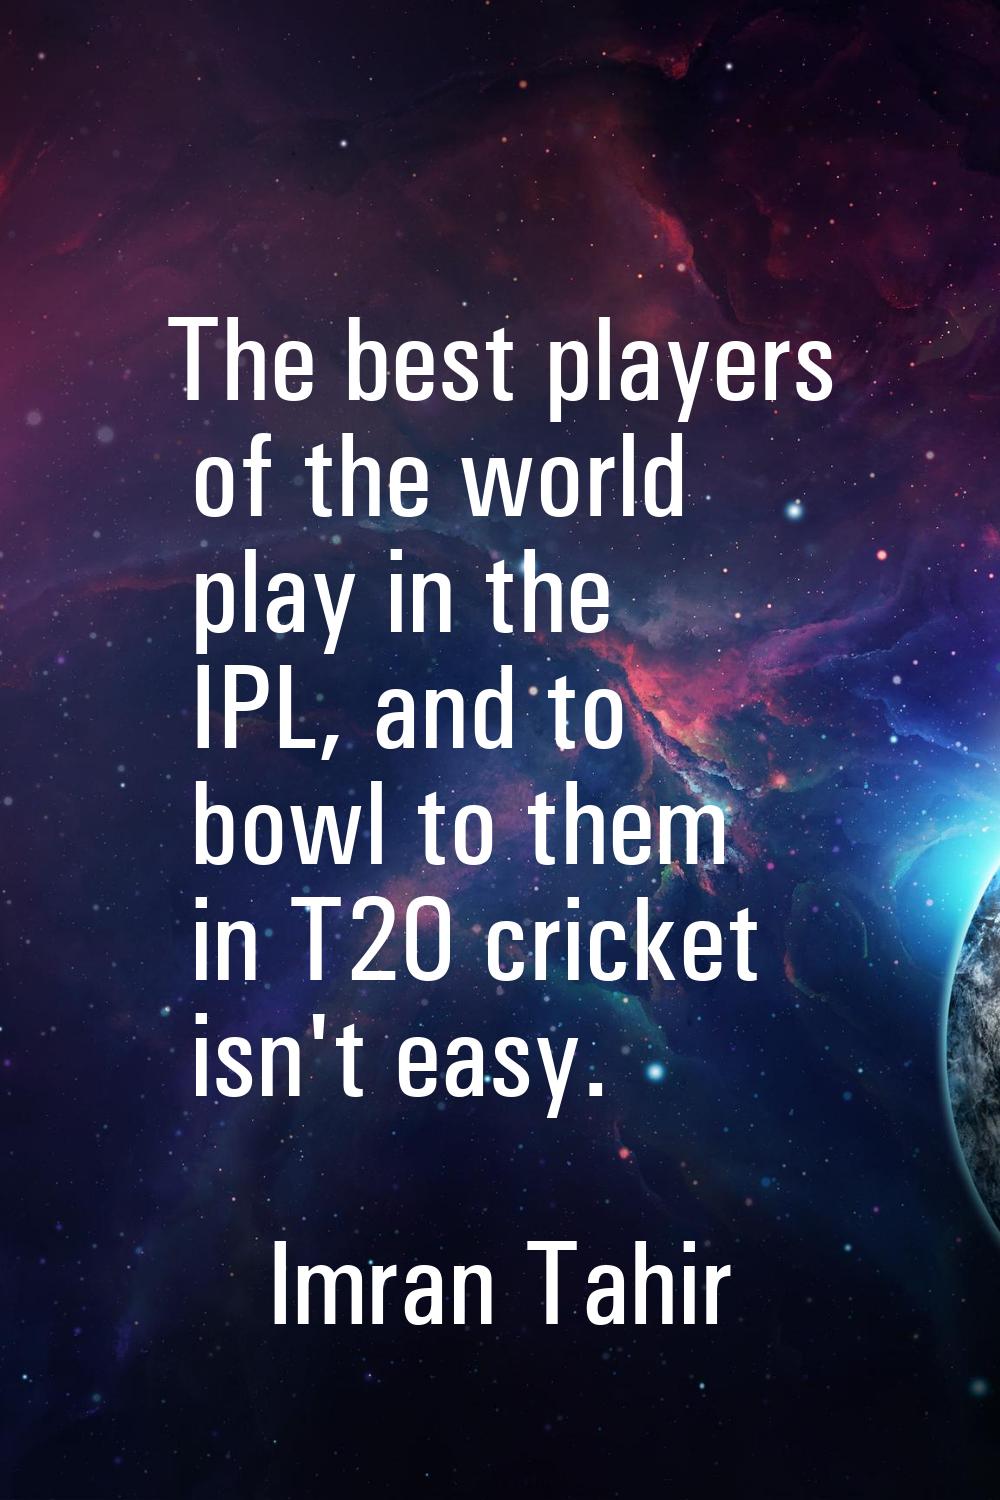 The best players of the world play in the IPL, and to bowl to them in T20 cricket isn't easy.